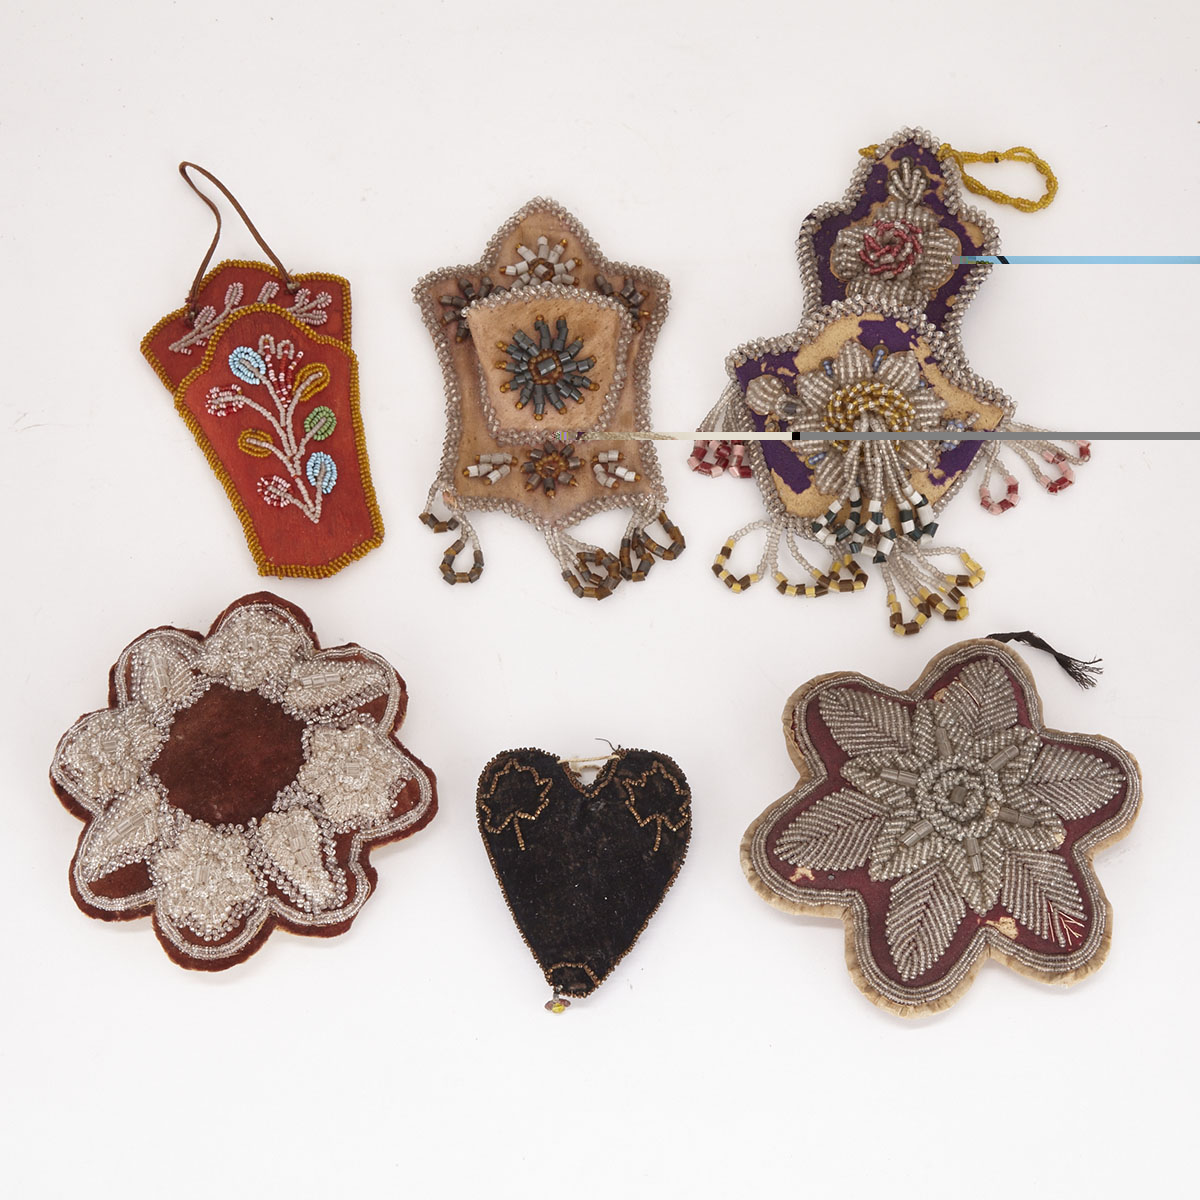 Six Iroquois Beaded Whimsies, late 19th/early 20th century